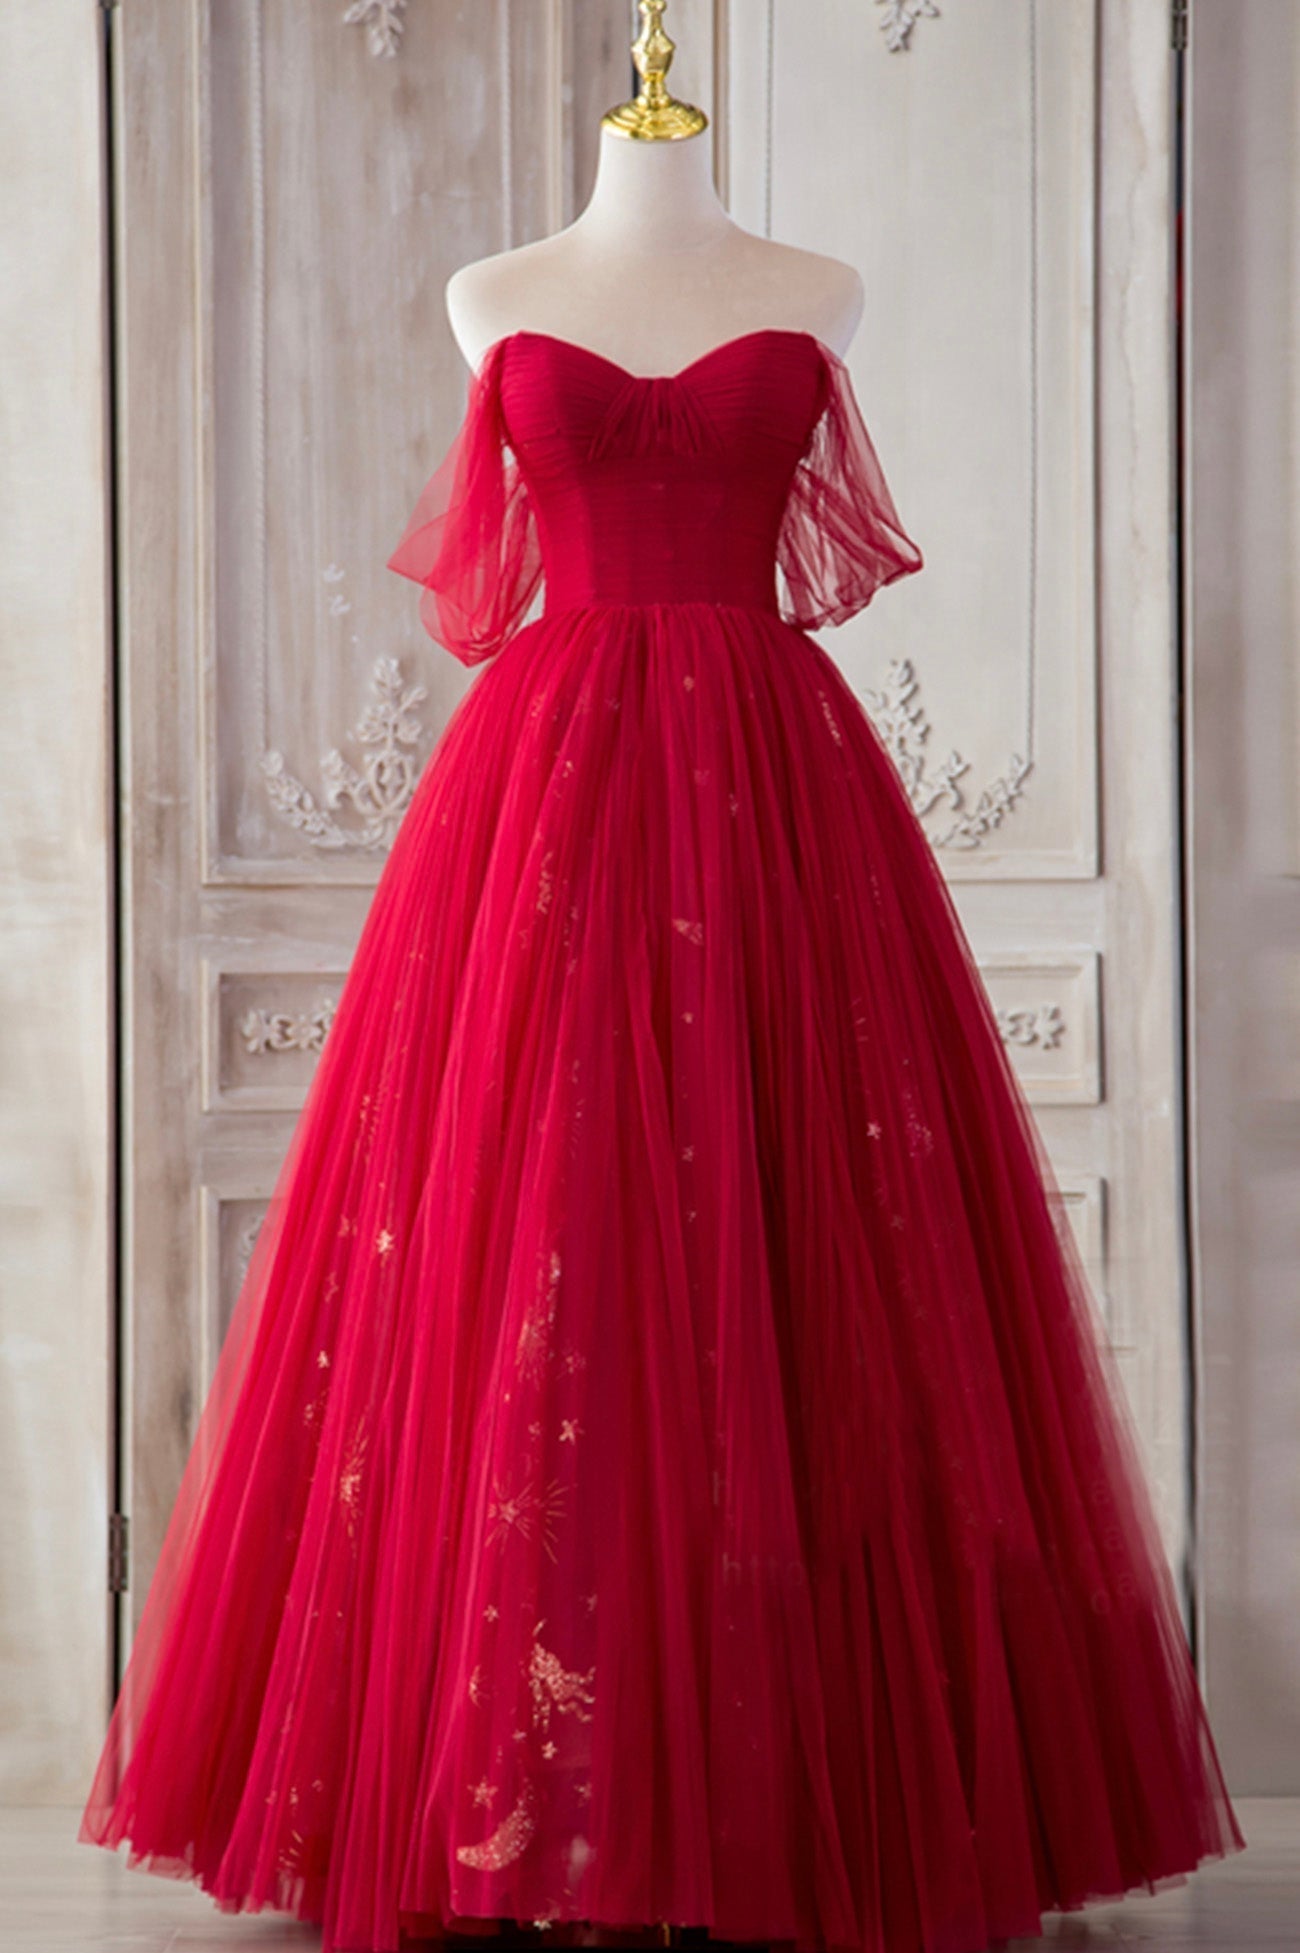 Red Tulle Long Corset Prom Dresses, A-Line Off the Shoulder Corset Formal Dresses outfit, Party Dress Style Shop